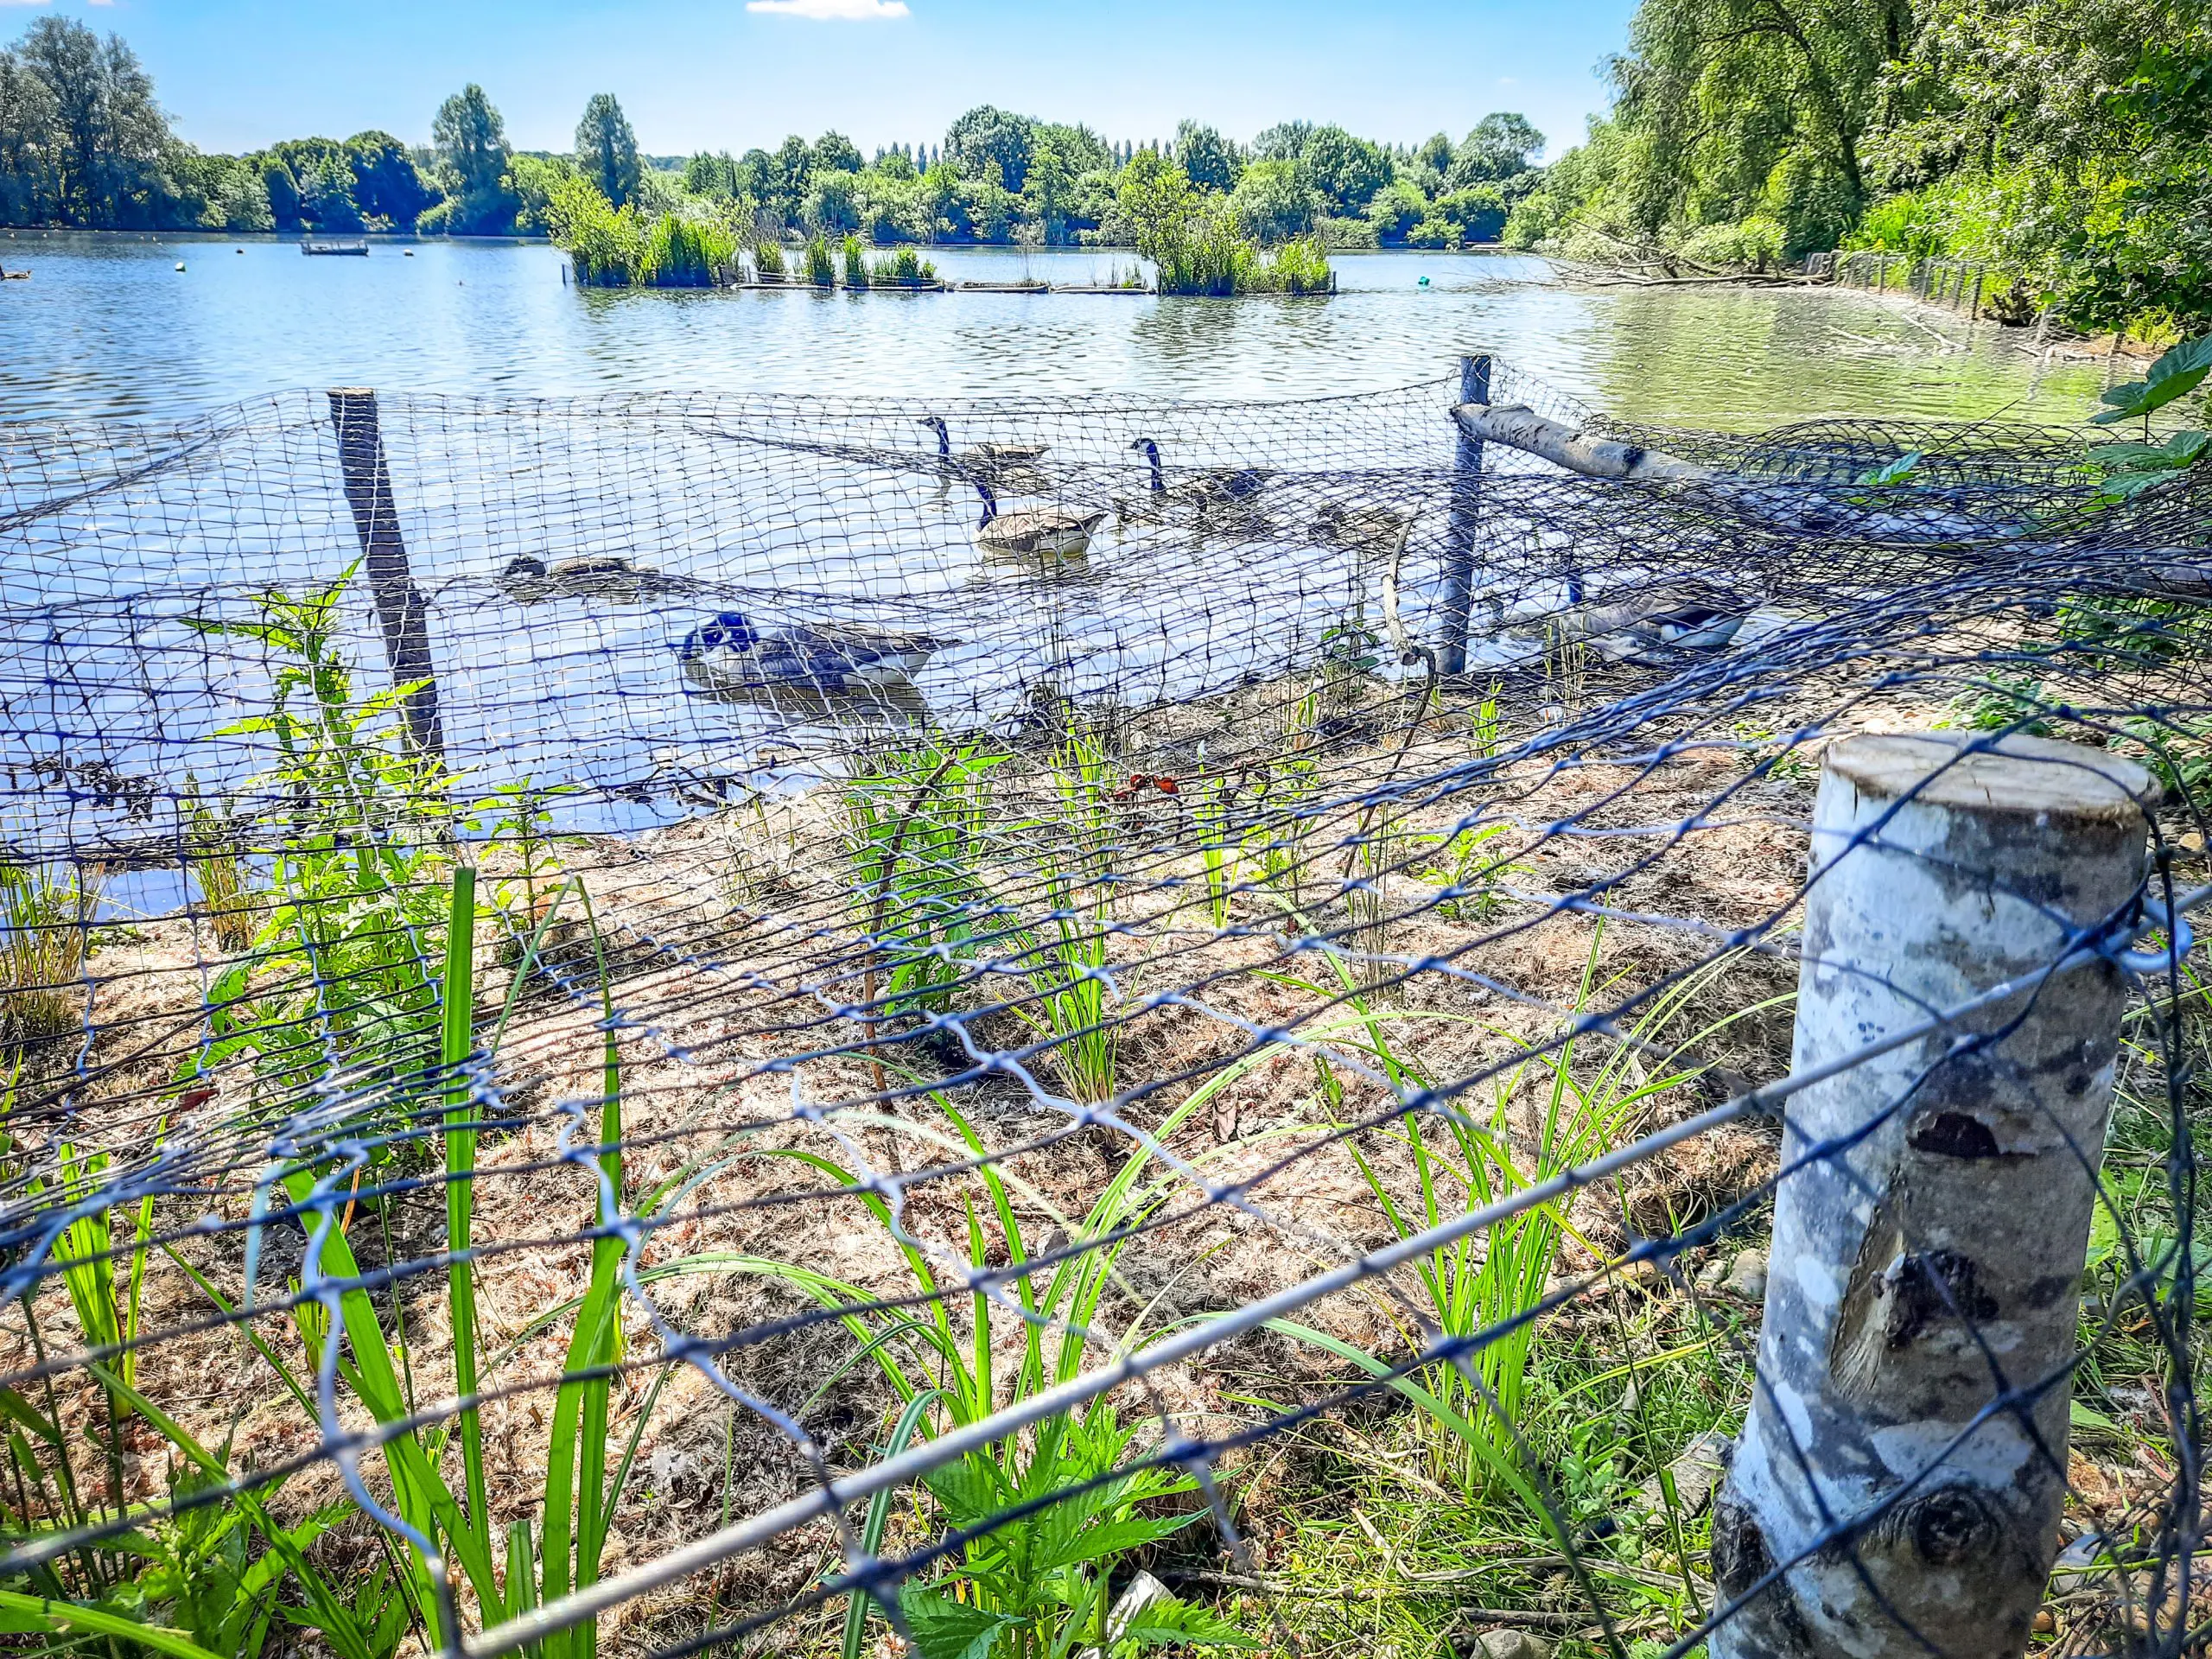 60 metres of new margins have been created on the banks and around theisland in the centre of the lake to provide improved habitat for a number of species including invertebrates such as such as dragonflies and damselflies.